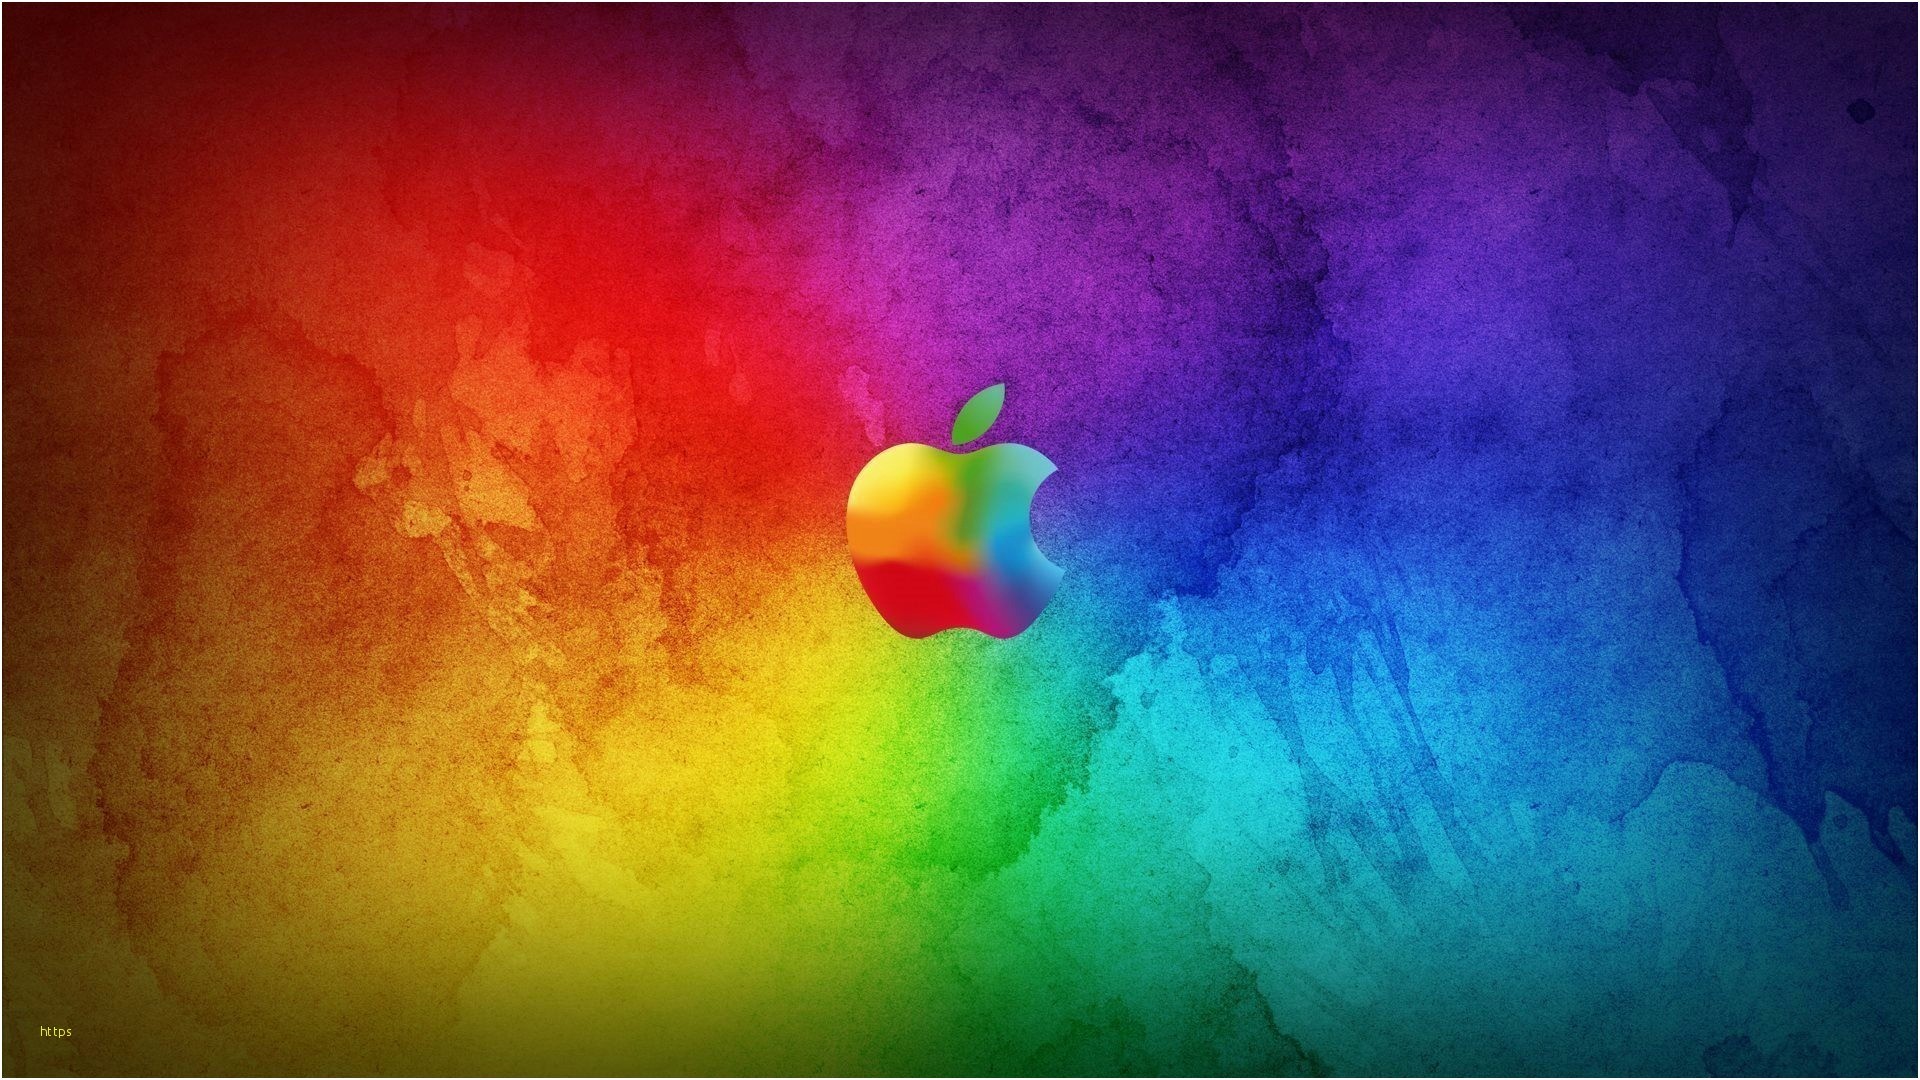 1920x1080 Wallpaper For My Phone Fresh Apple Colorful Logo Wallpapers Awesome  Wallpaper Desktop Apple Fresh